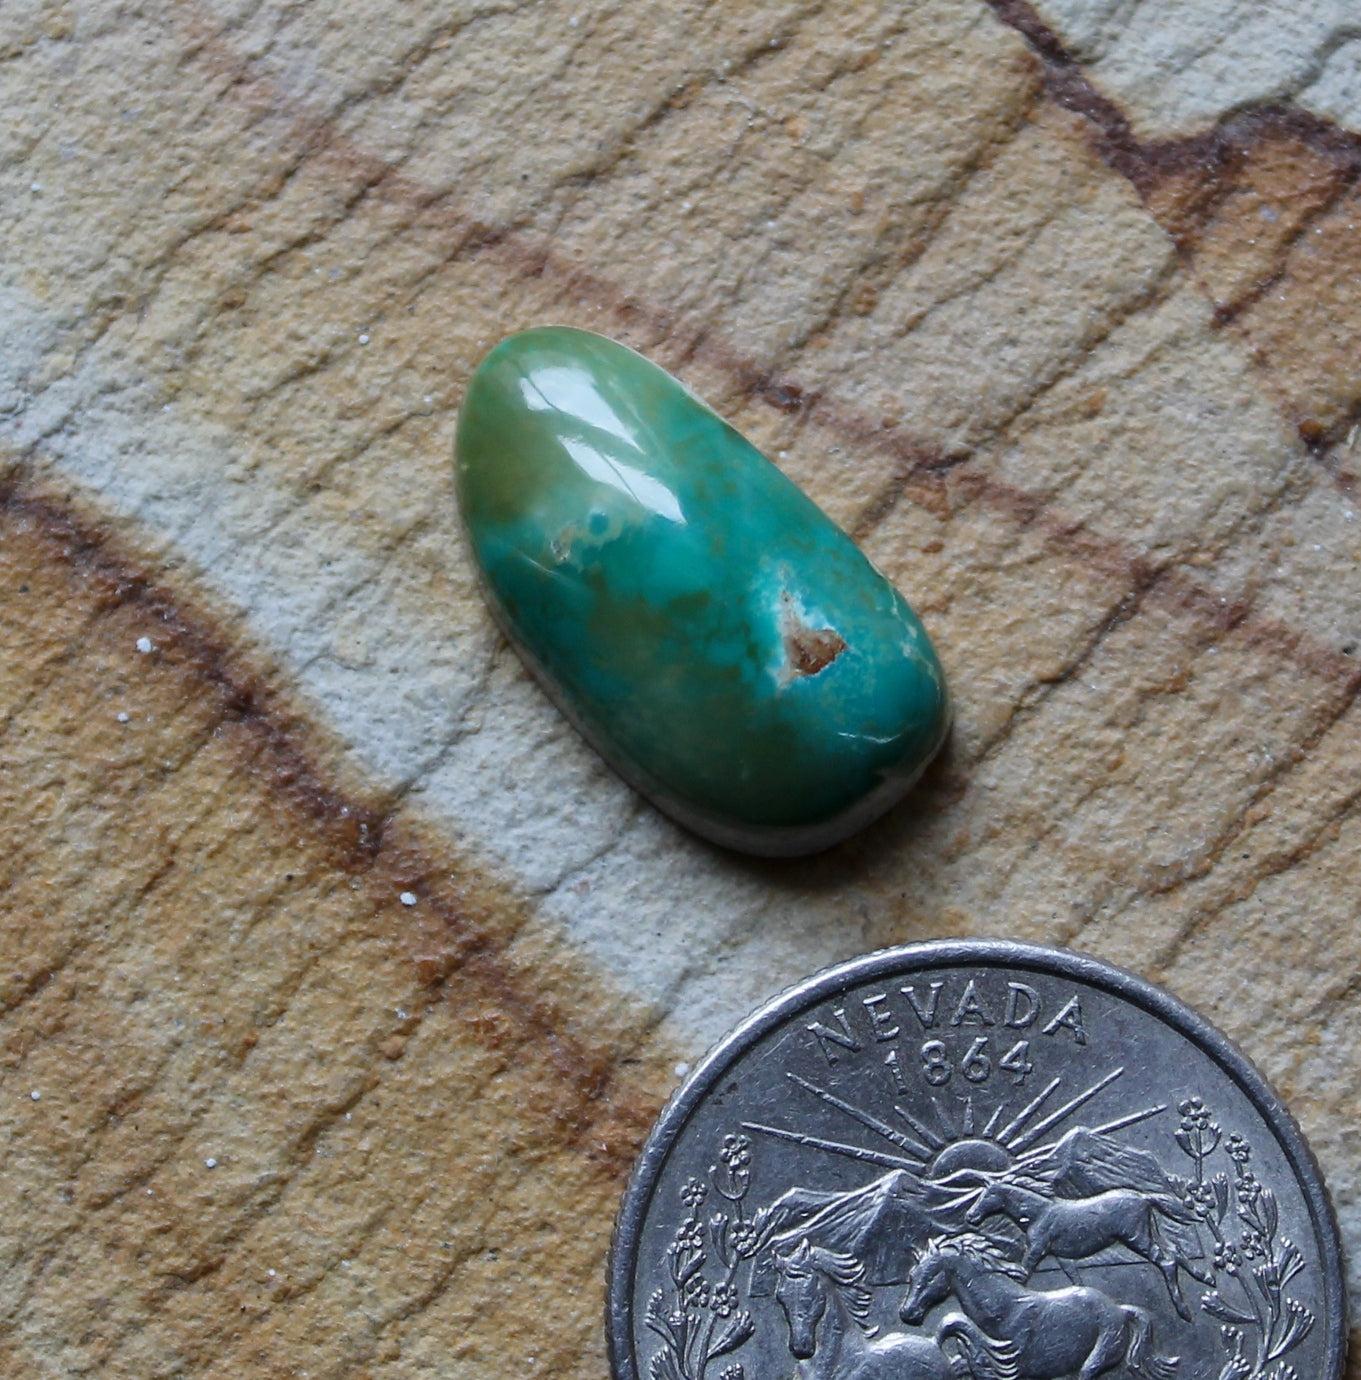 9.6 carat green Stone Mountain Turquoise cabochon with a high dome